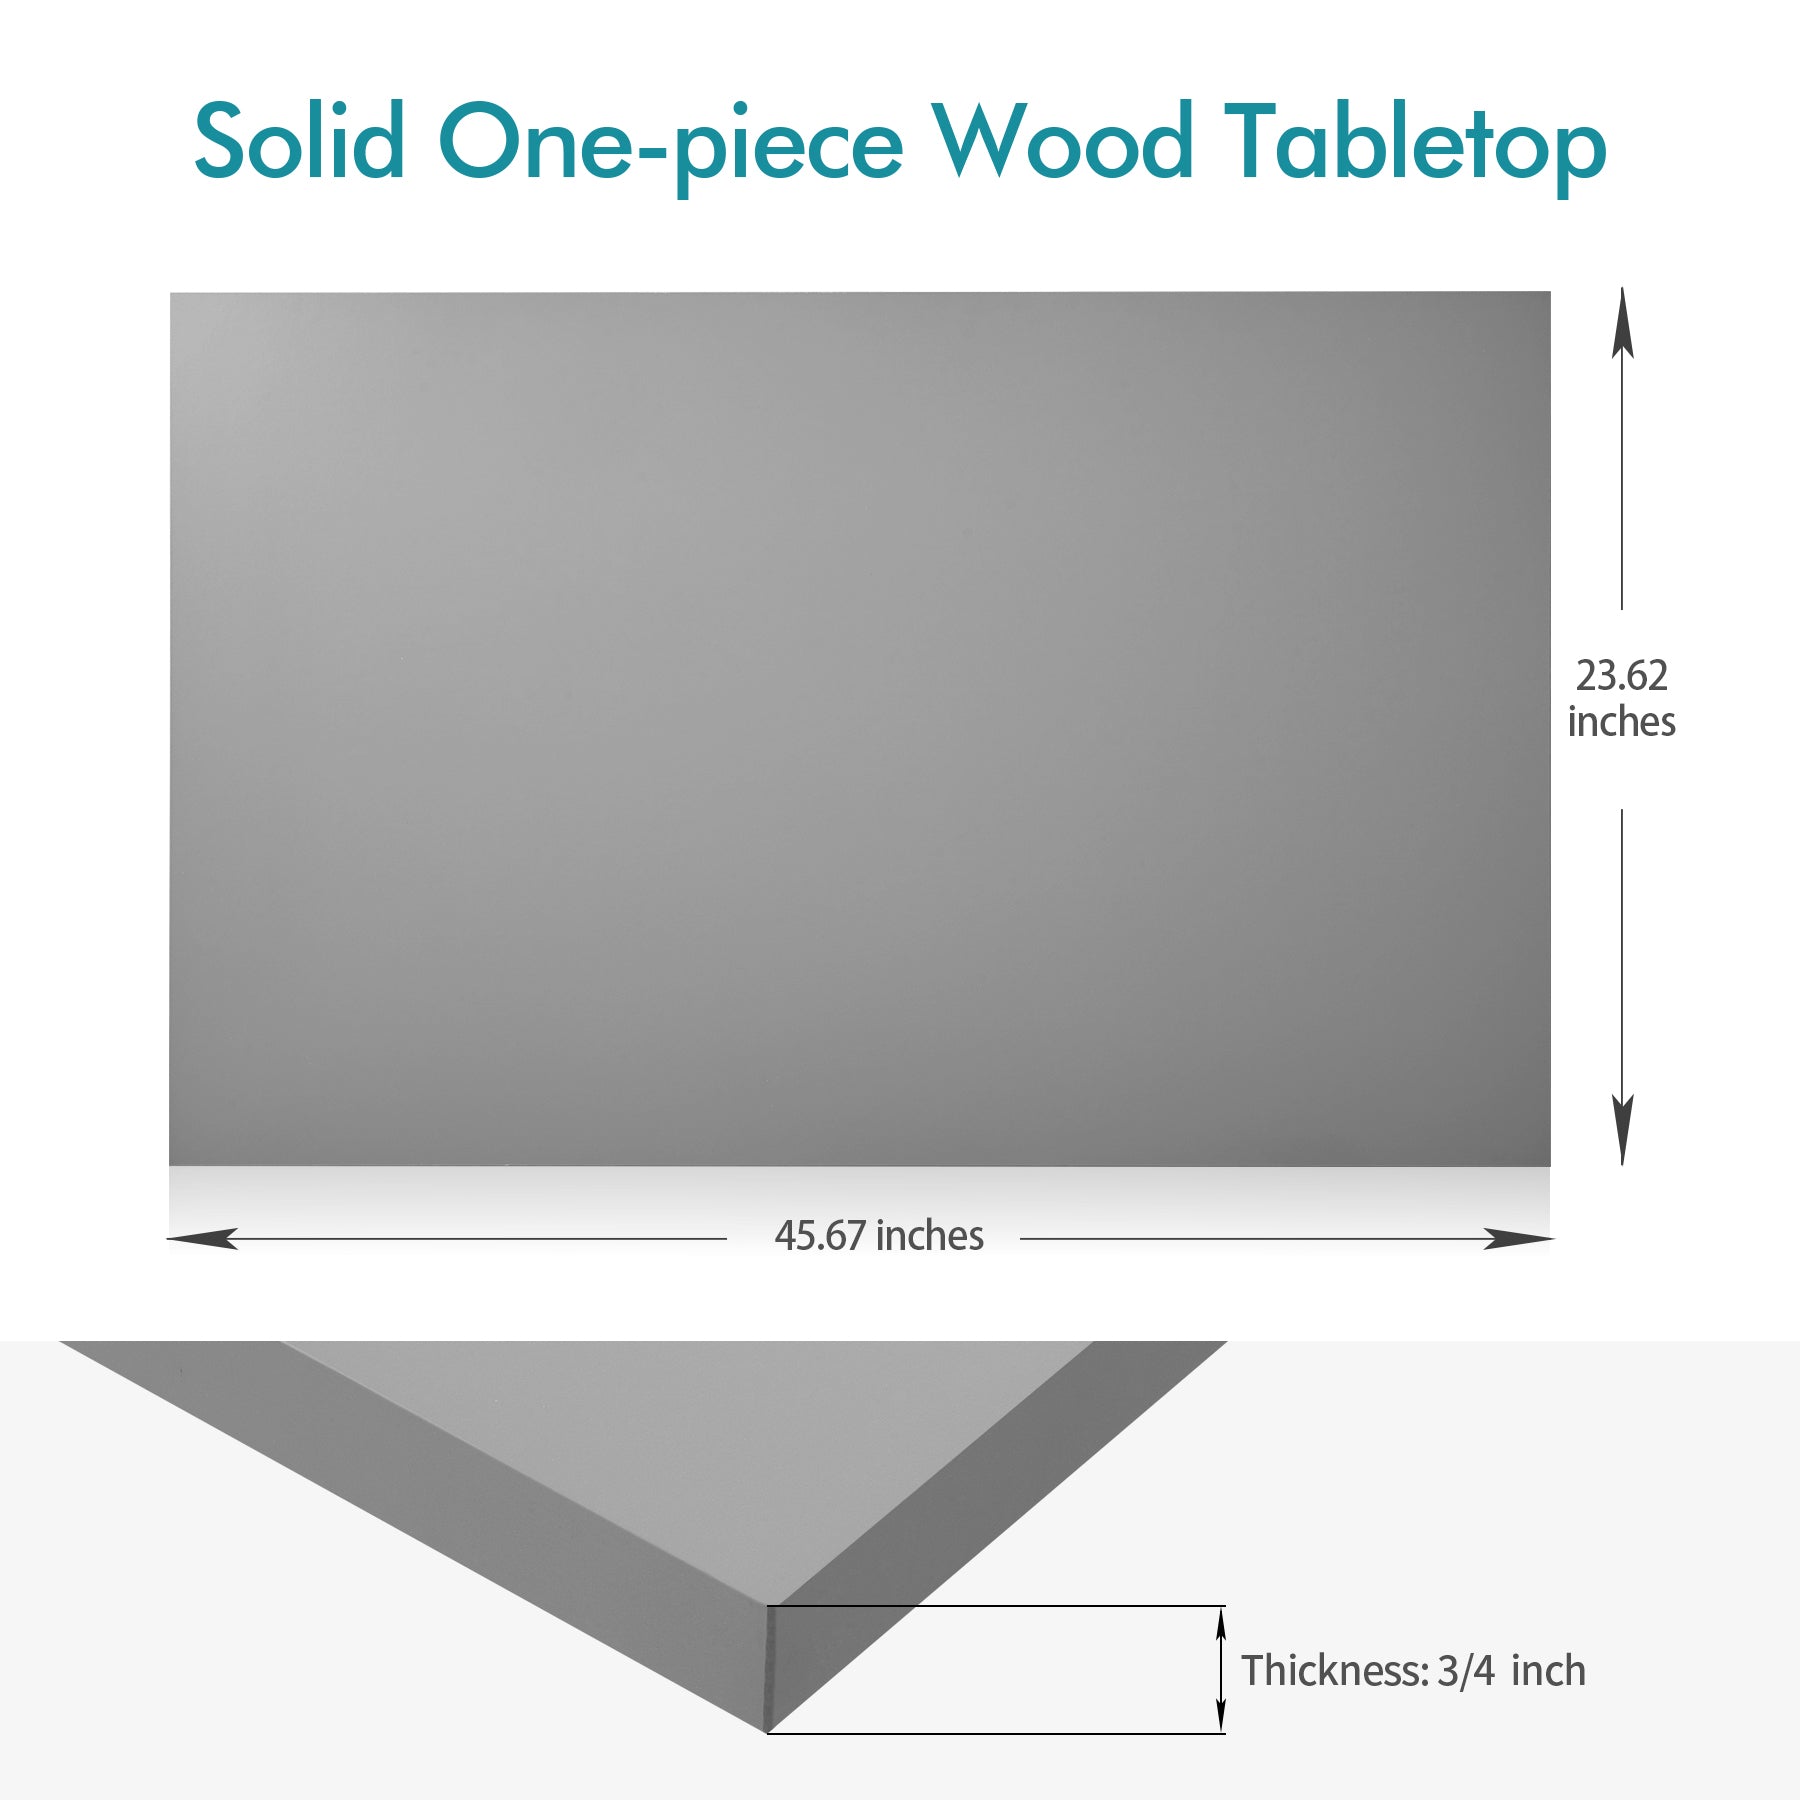 46x24 one-piece wood table top in gray